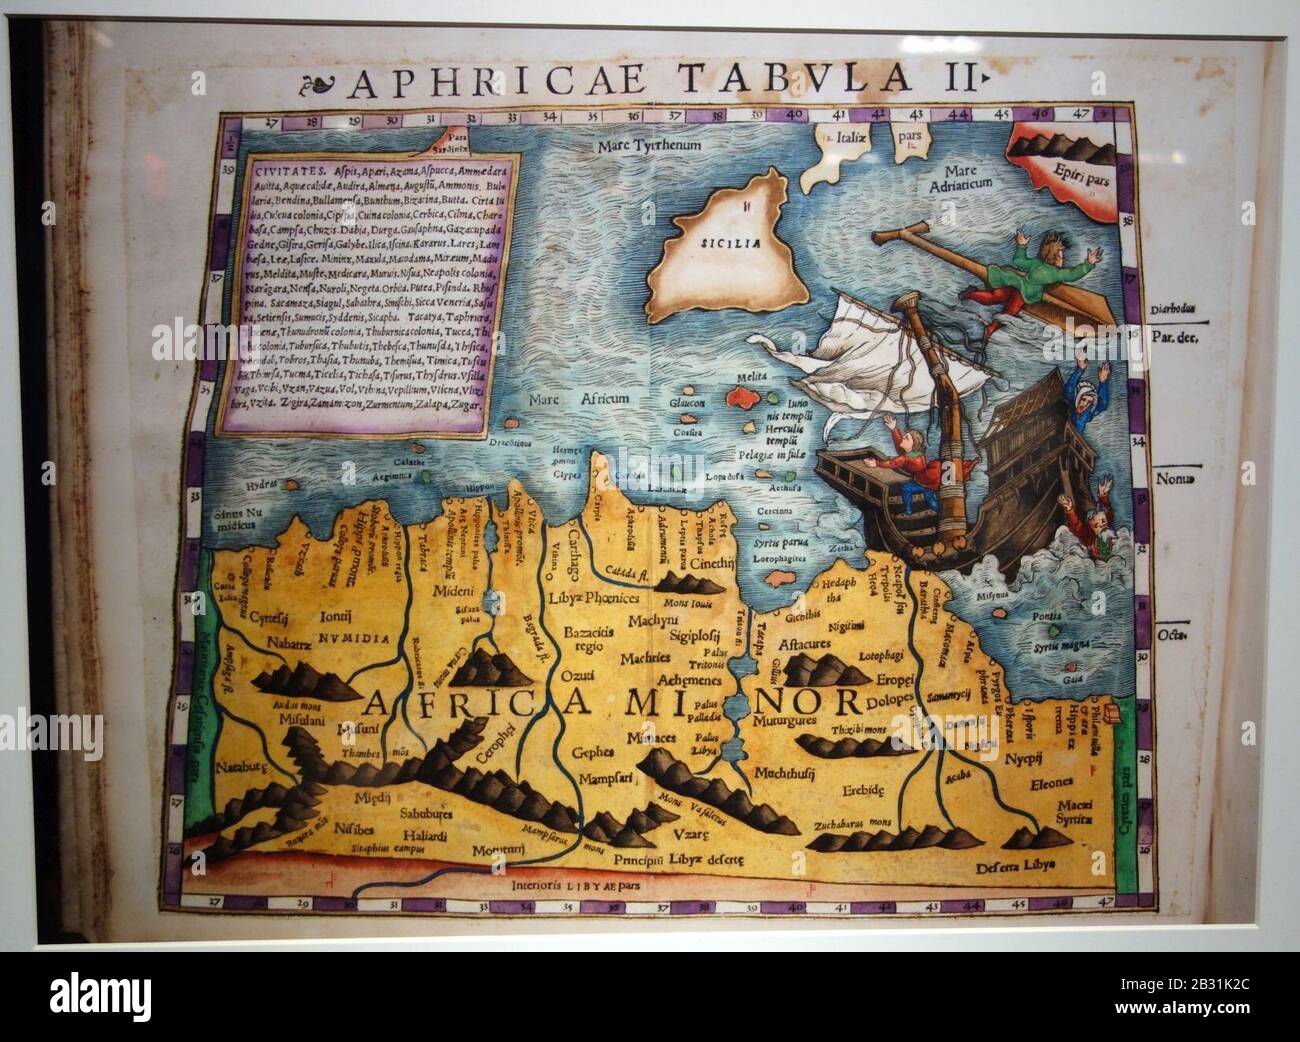 Geographia by Ptolemy, Aphricae Tabula II, 1540 Basel edition - Maps of Africa - Stock Photo